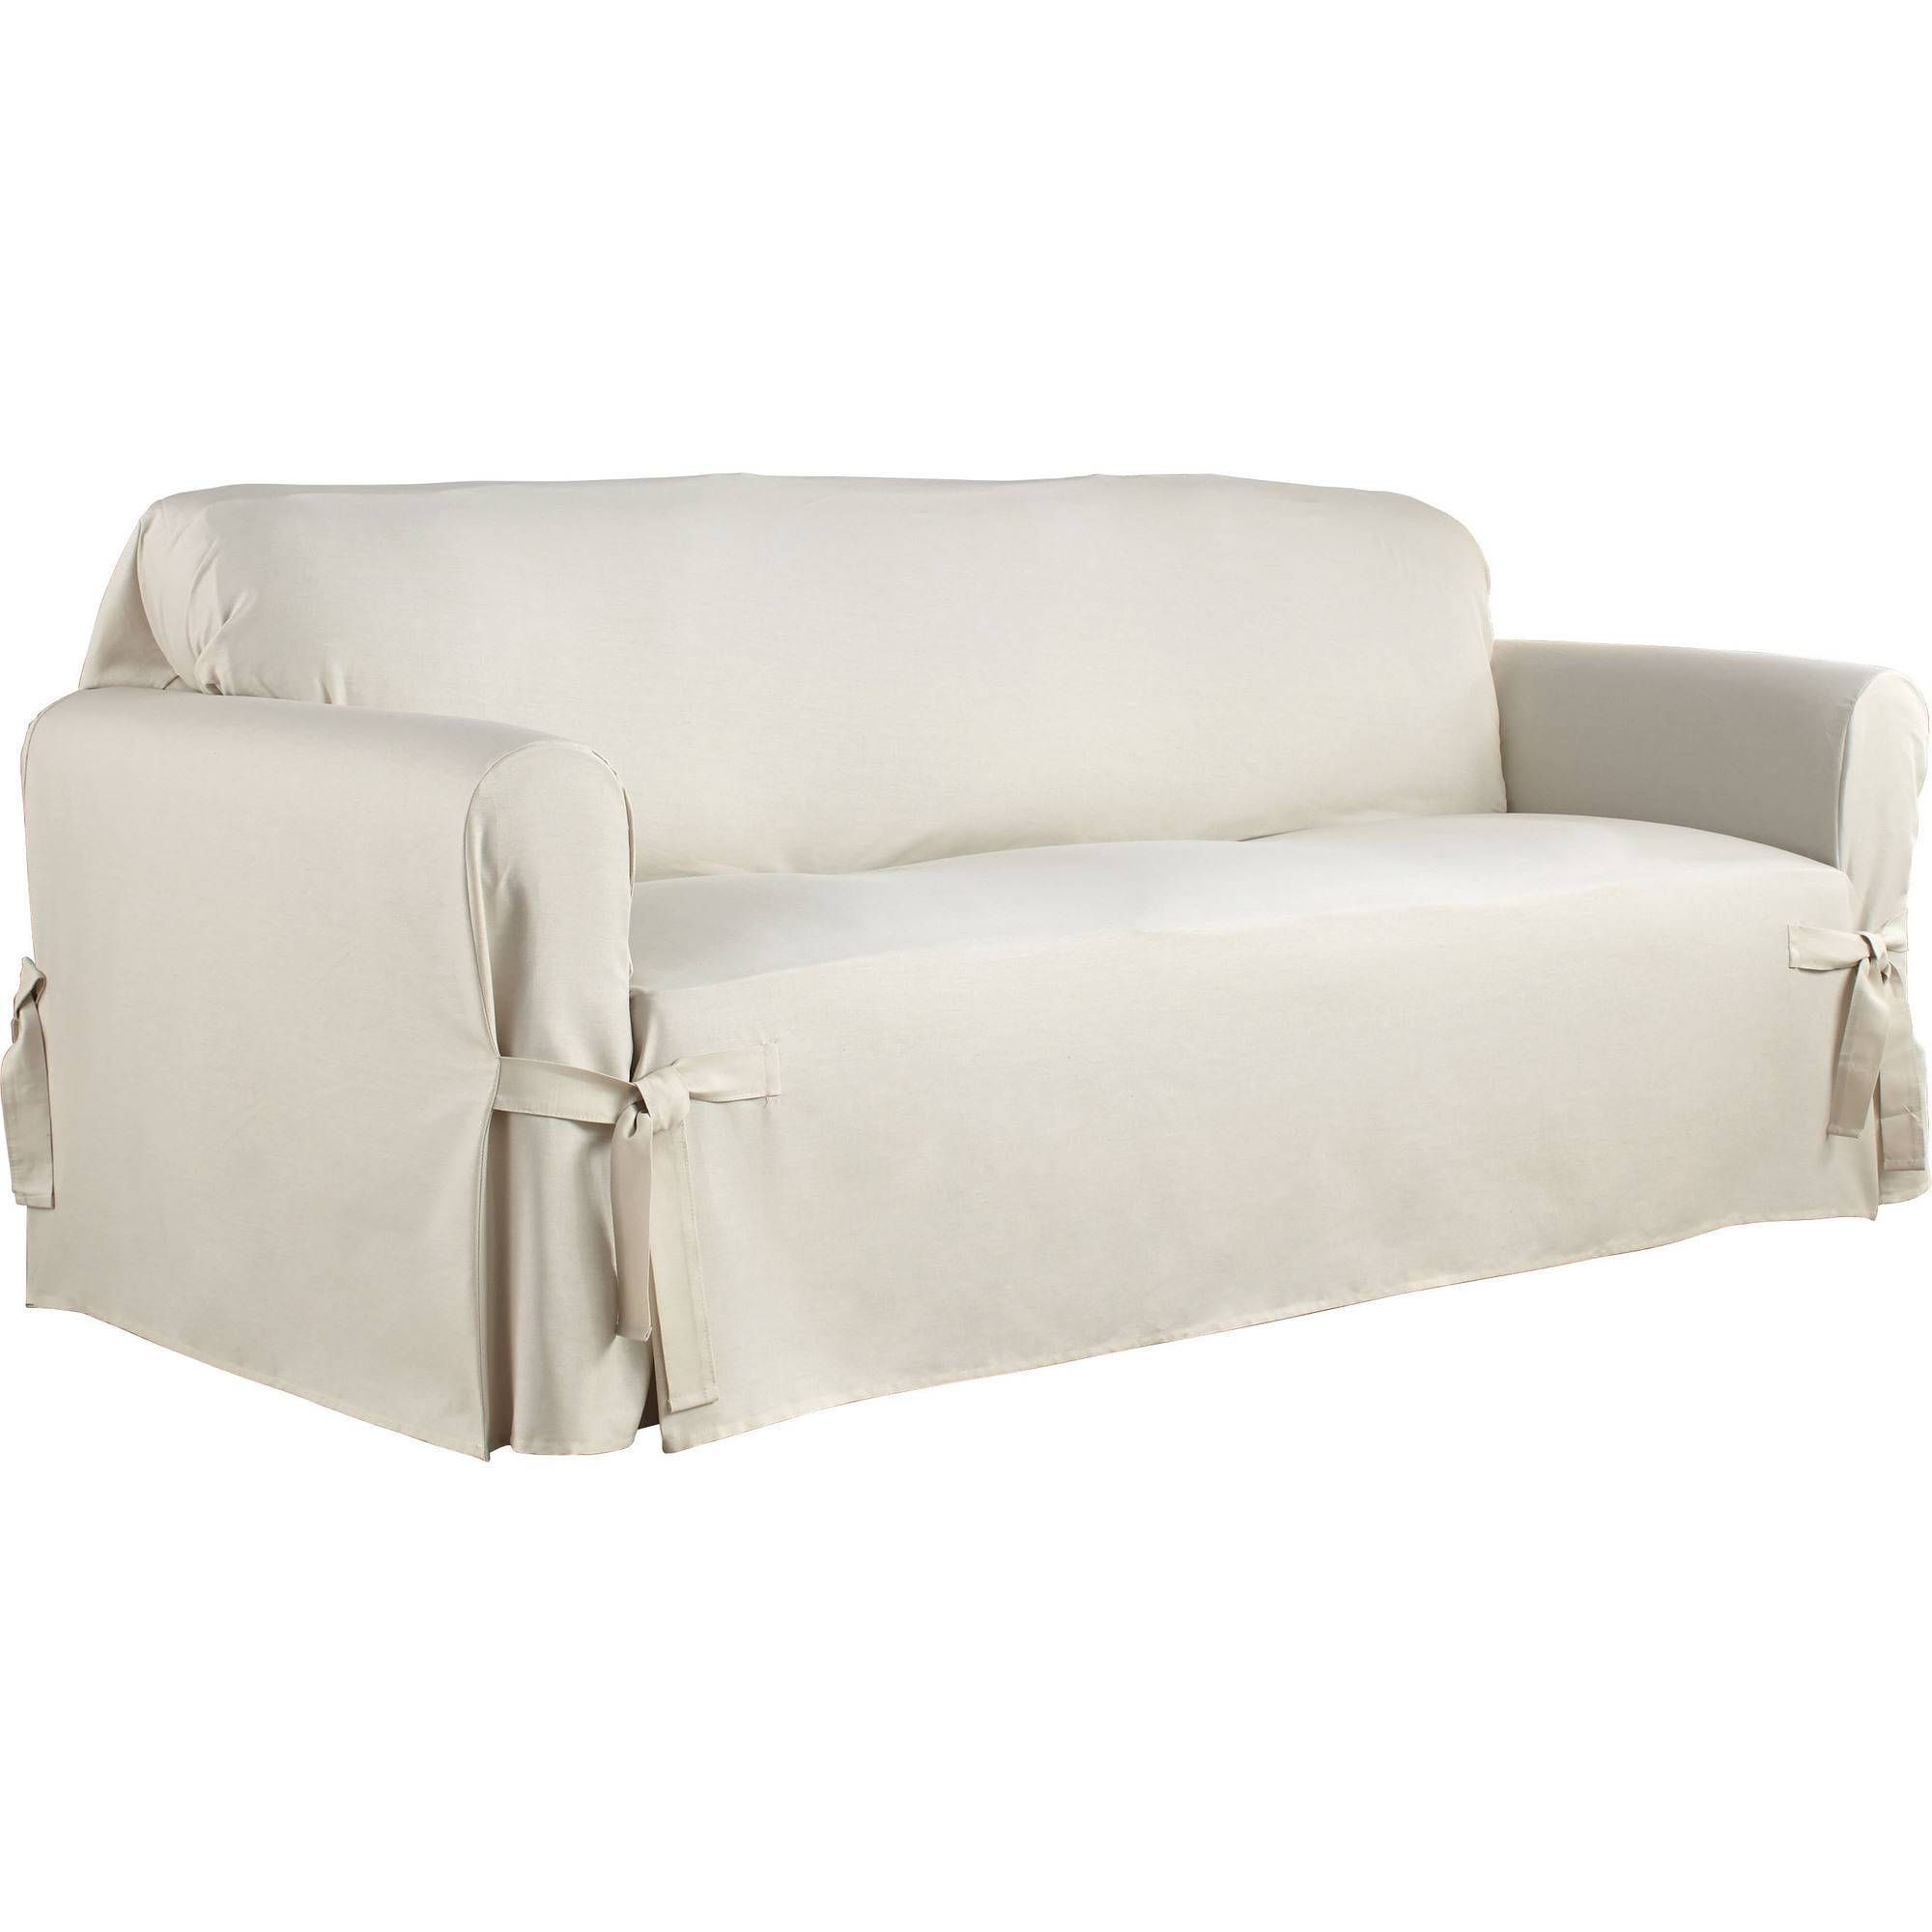 Tips: Smooth Slipcovers Sofa For Cozy Your Furniture Ideas Throughout Slipcovers For Sleeper Sofas (View 6 of 15)